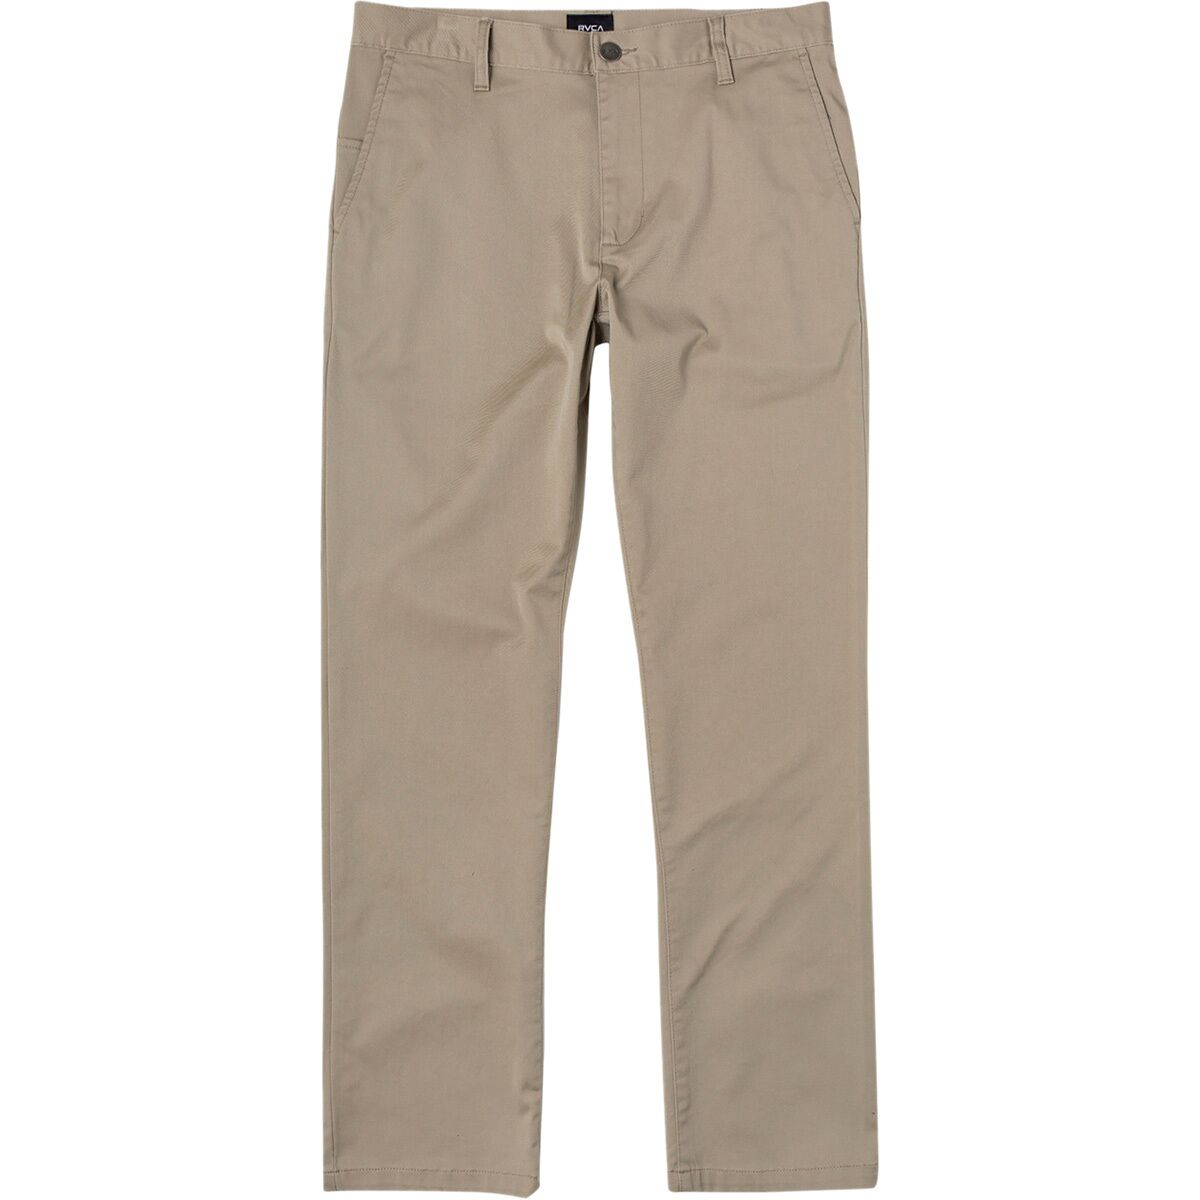 RVCA The Weekend Stretch Pant - Men's